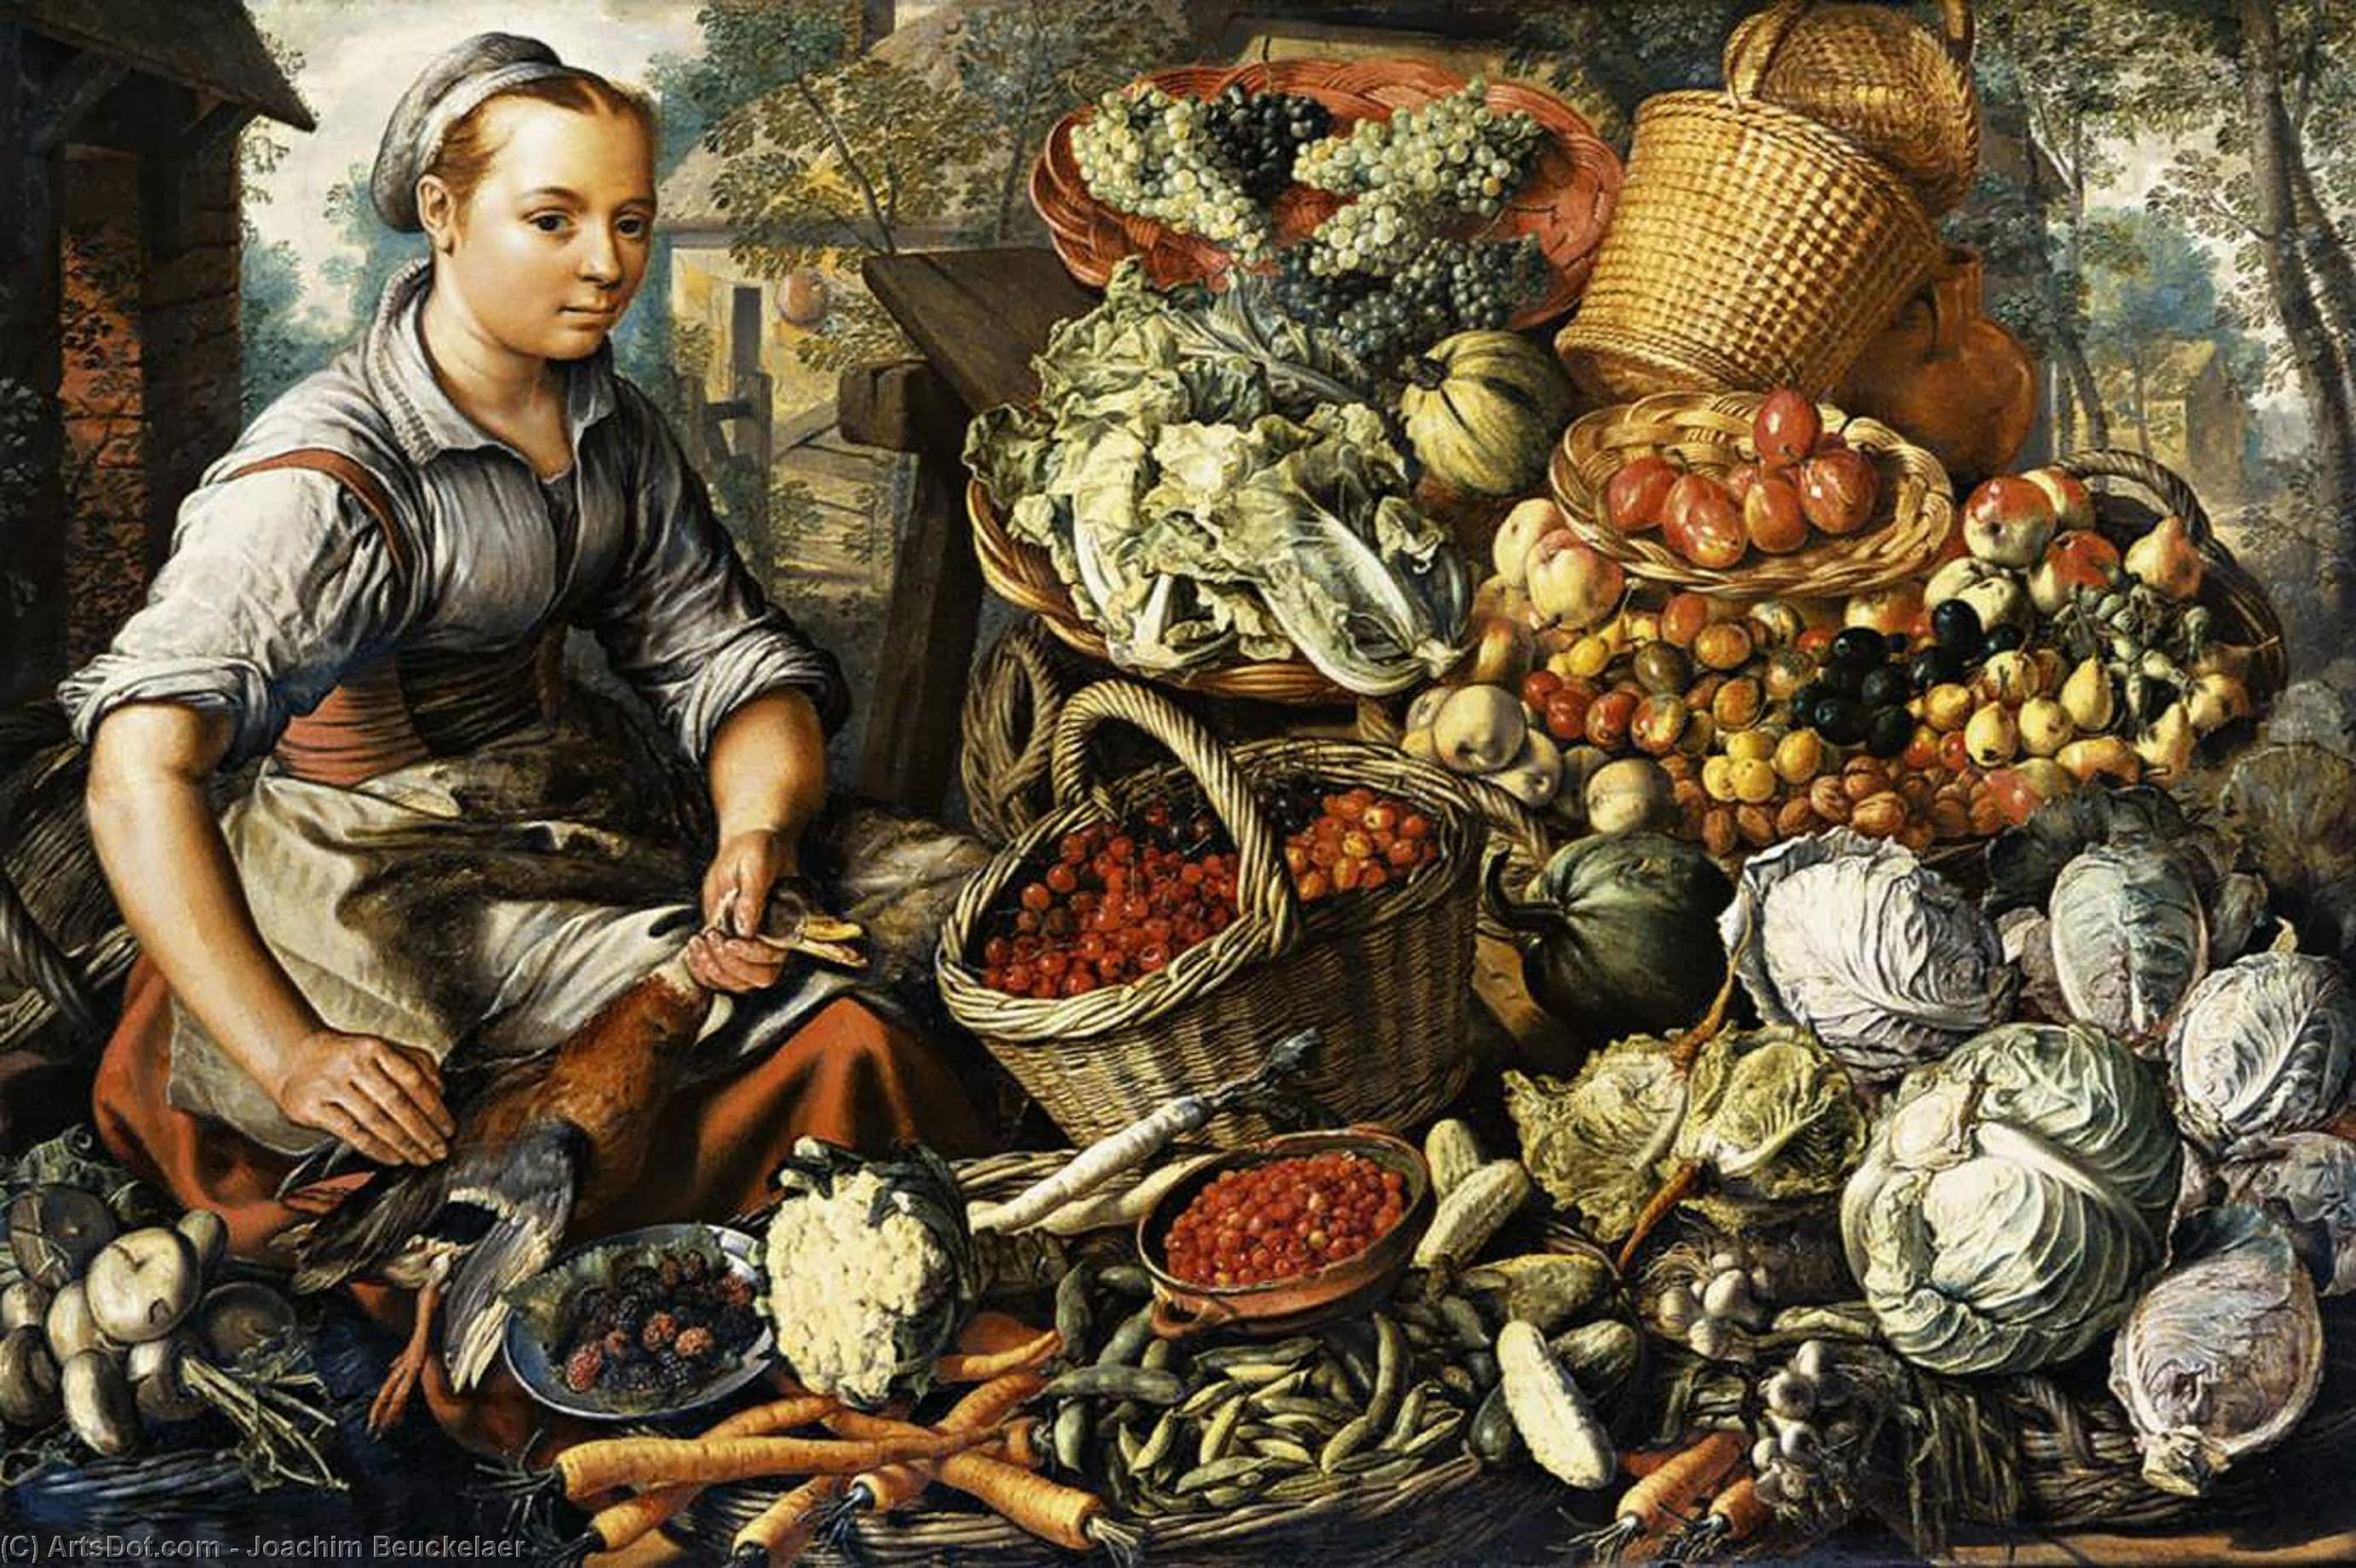 WikiOO.org - Encyclopedia of Fine Arts - Lukisan, Artwork Joachim Beuckelaer - Market Woman with Fruit, Vegetables and Poultry